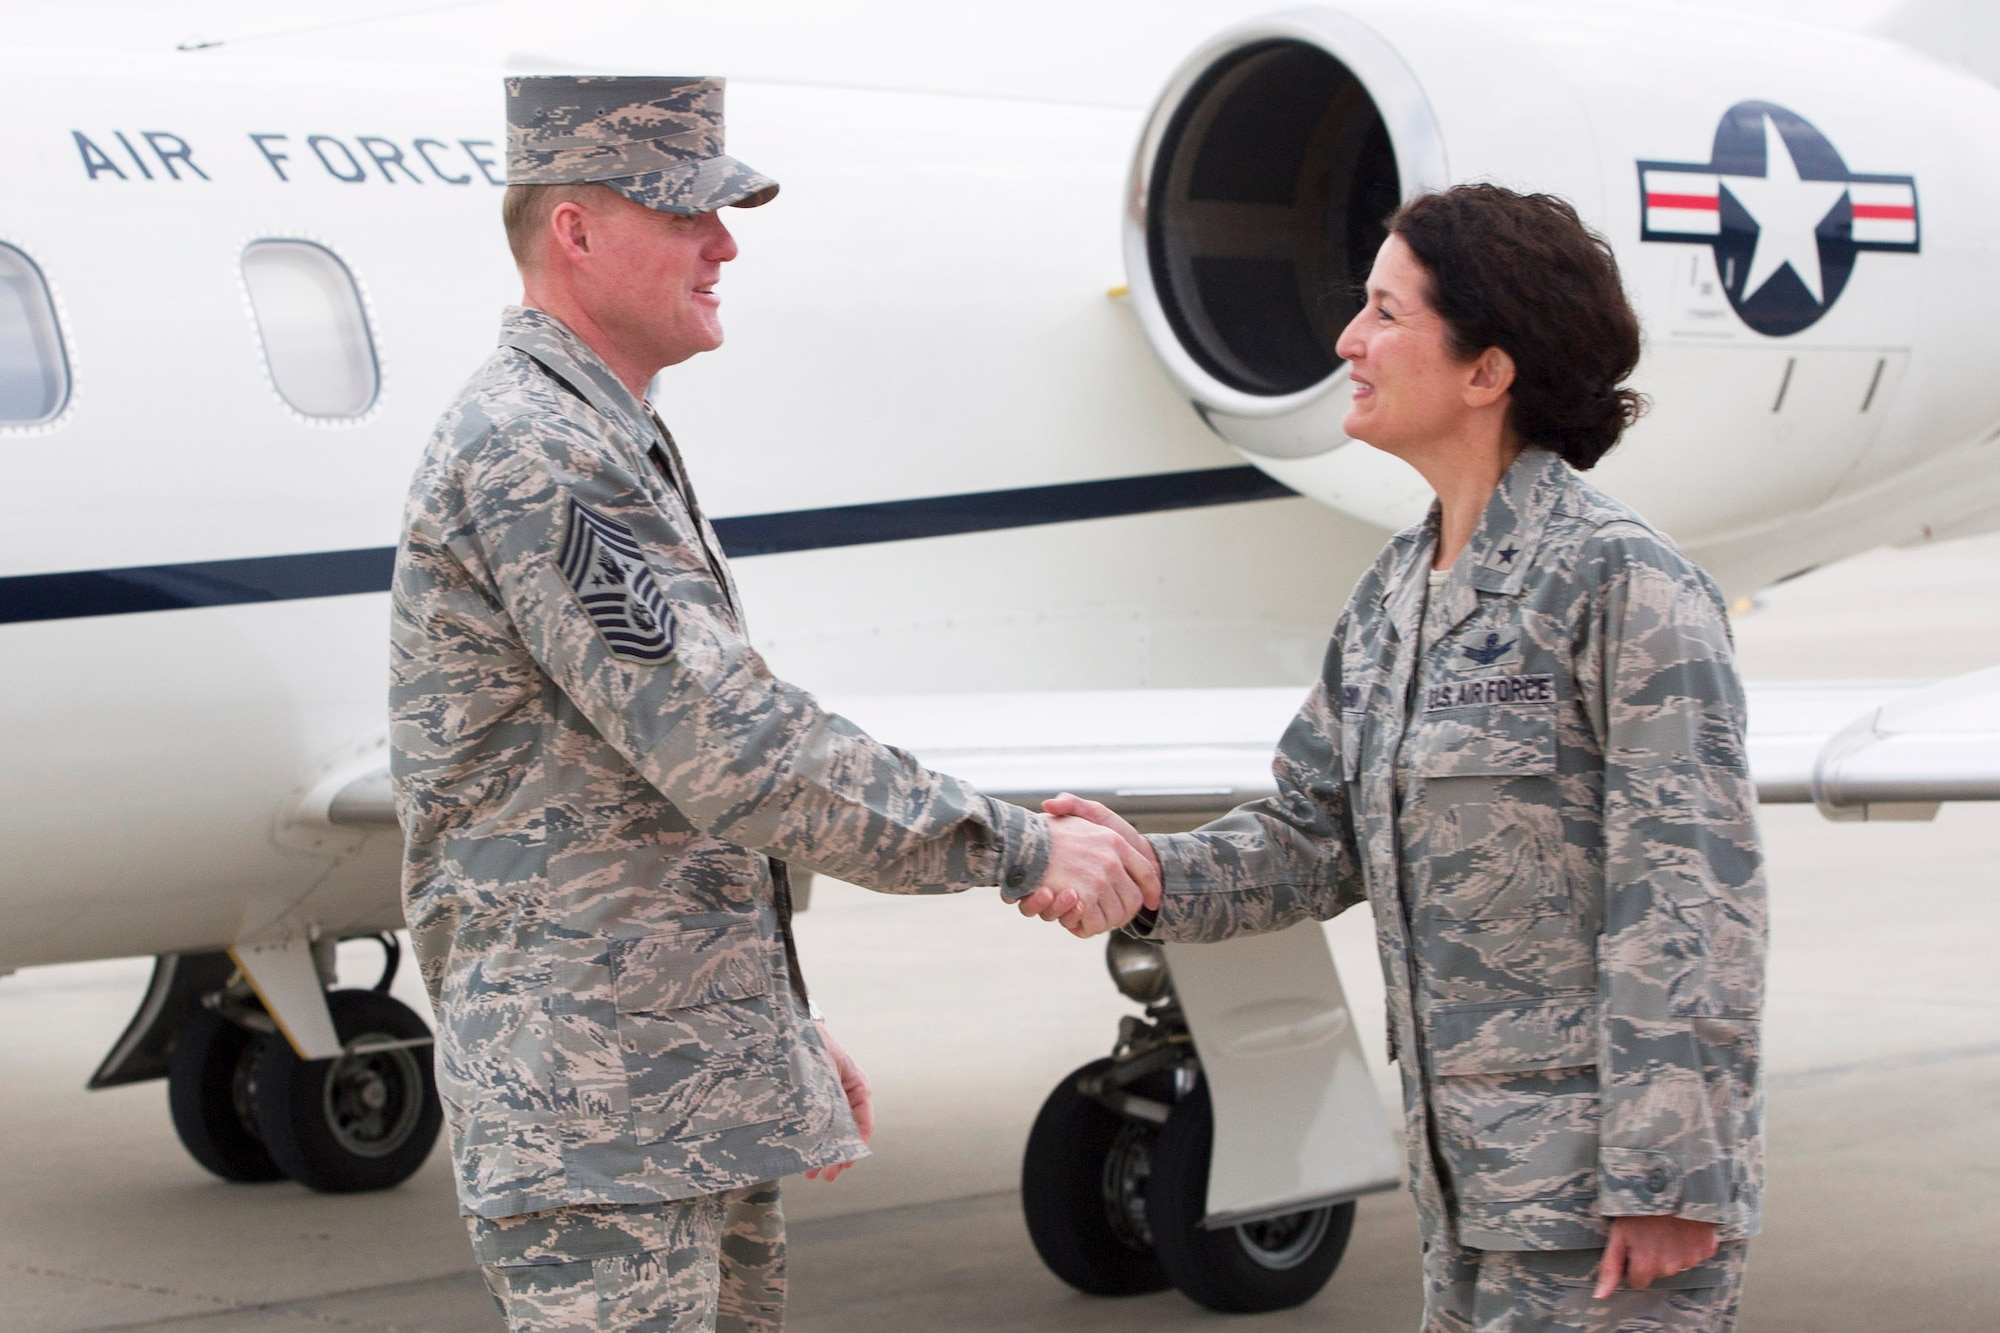 Brig. Gen. Nina Armagno, 45th Space Wing commander, greets Chief Master Sgt. of the Air Force James Cody, upon his arrival at Patrick Air Force Base, Fla., March 24, 2014. Cody, the Air Force’s highest ranking enlisted Airman spent three days with Team Patrick-Cape to get a first-hand look at the mission and personally thank the Airmen. (Air Force photo/Matthew Jurgens).